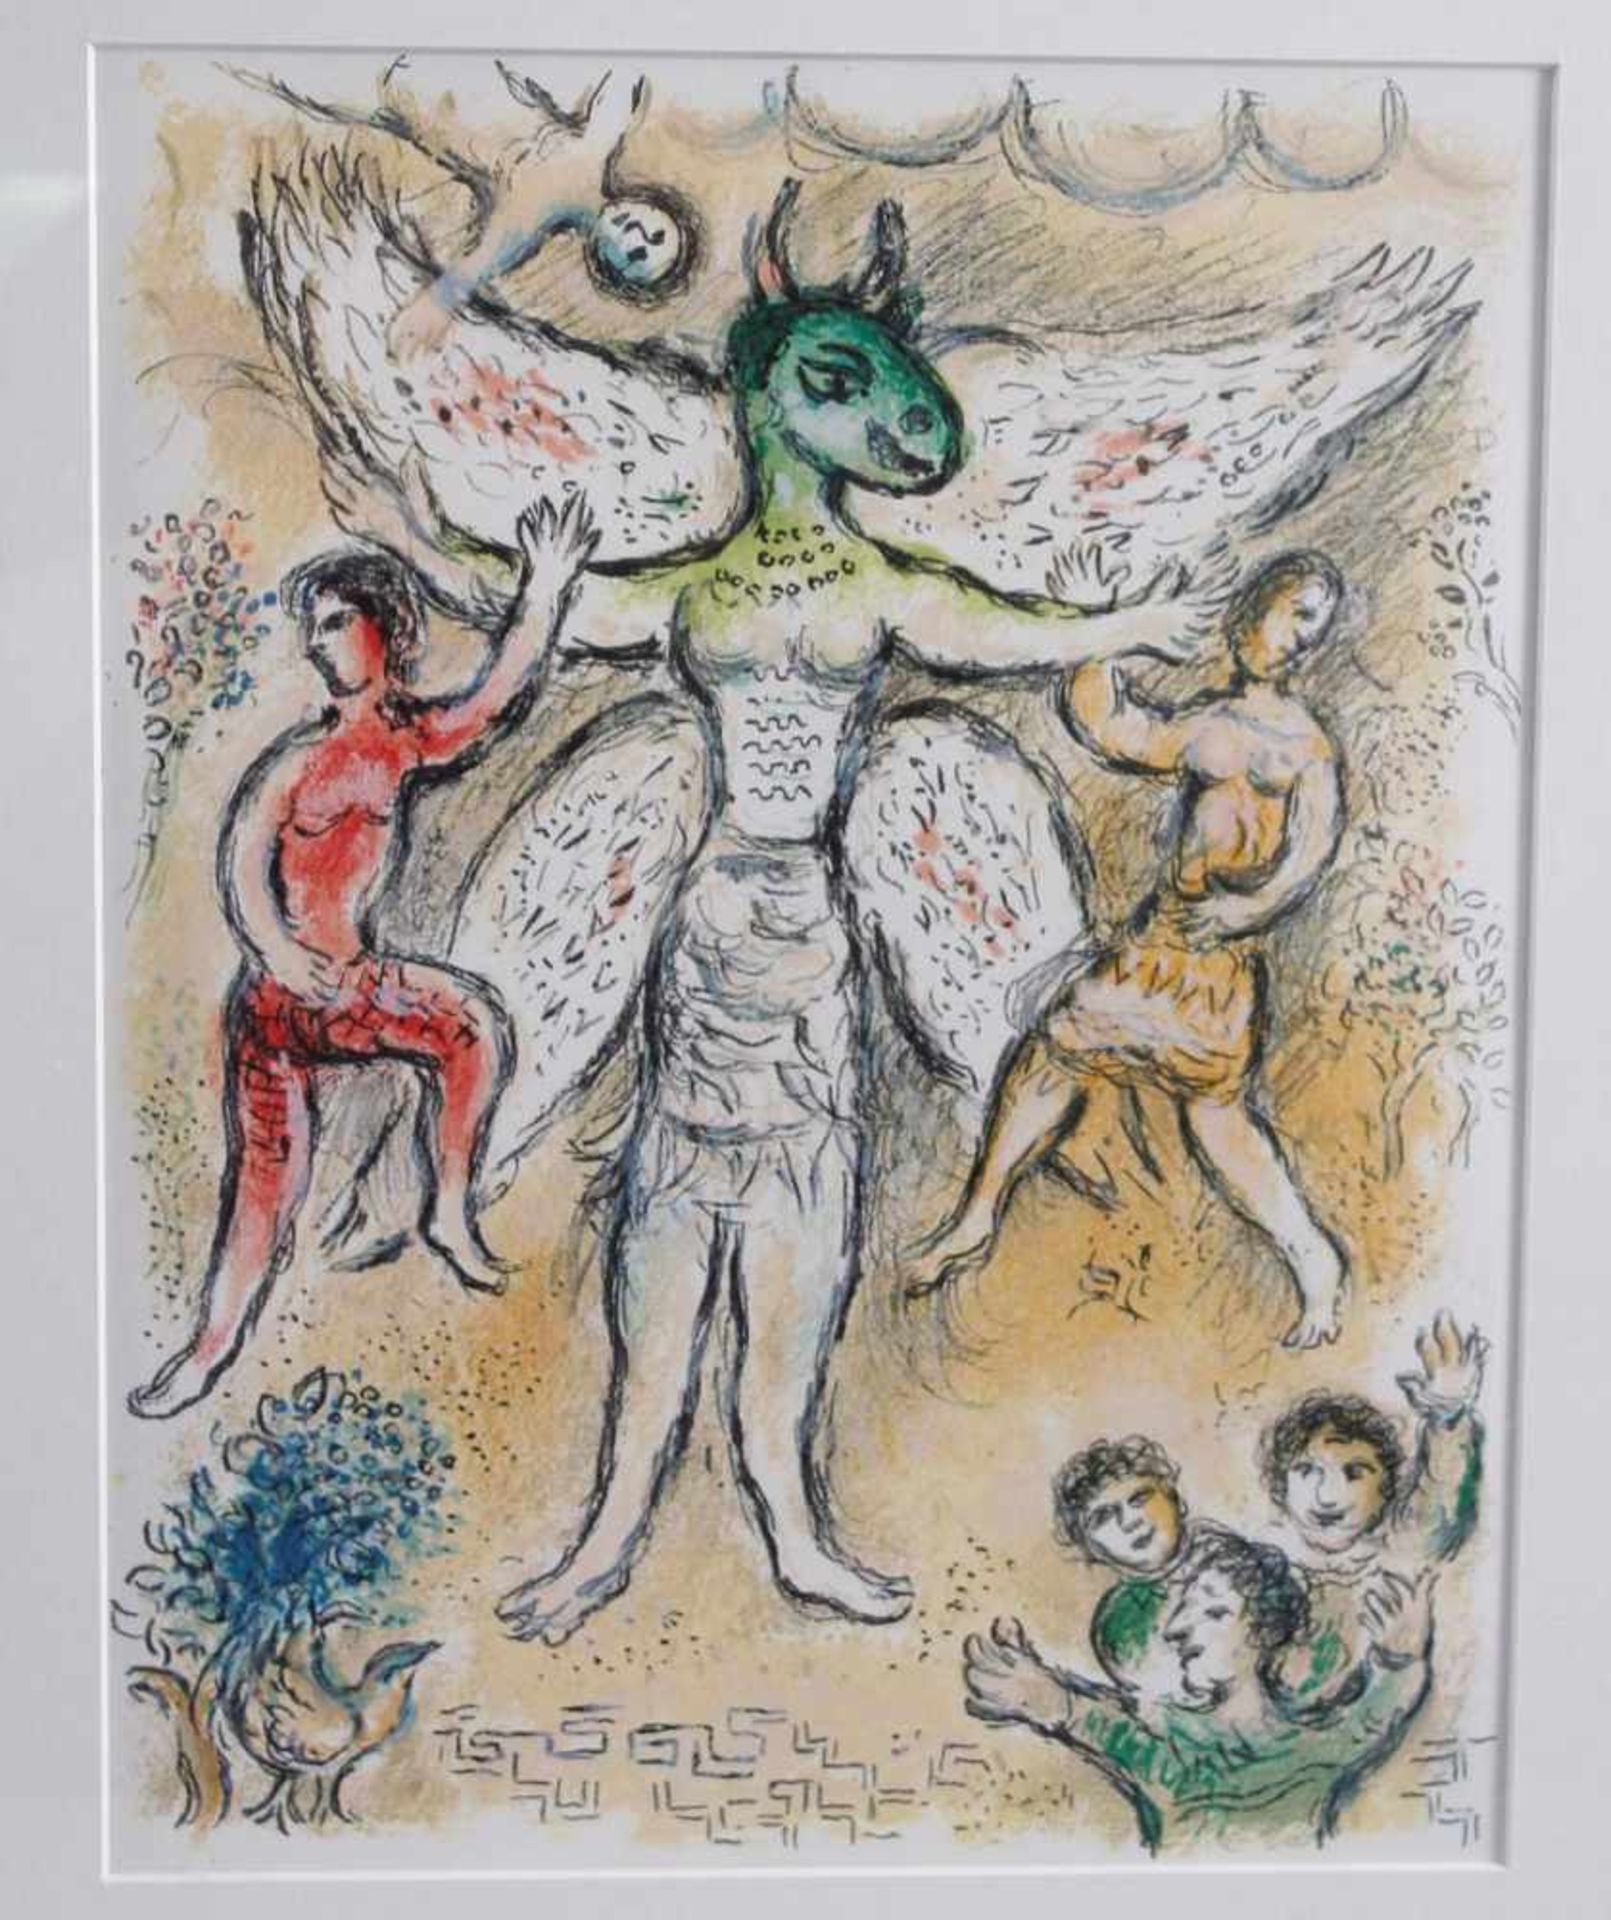 Marc Chagall, Farblithografie aus der Odyssee - Image 2 of 2